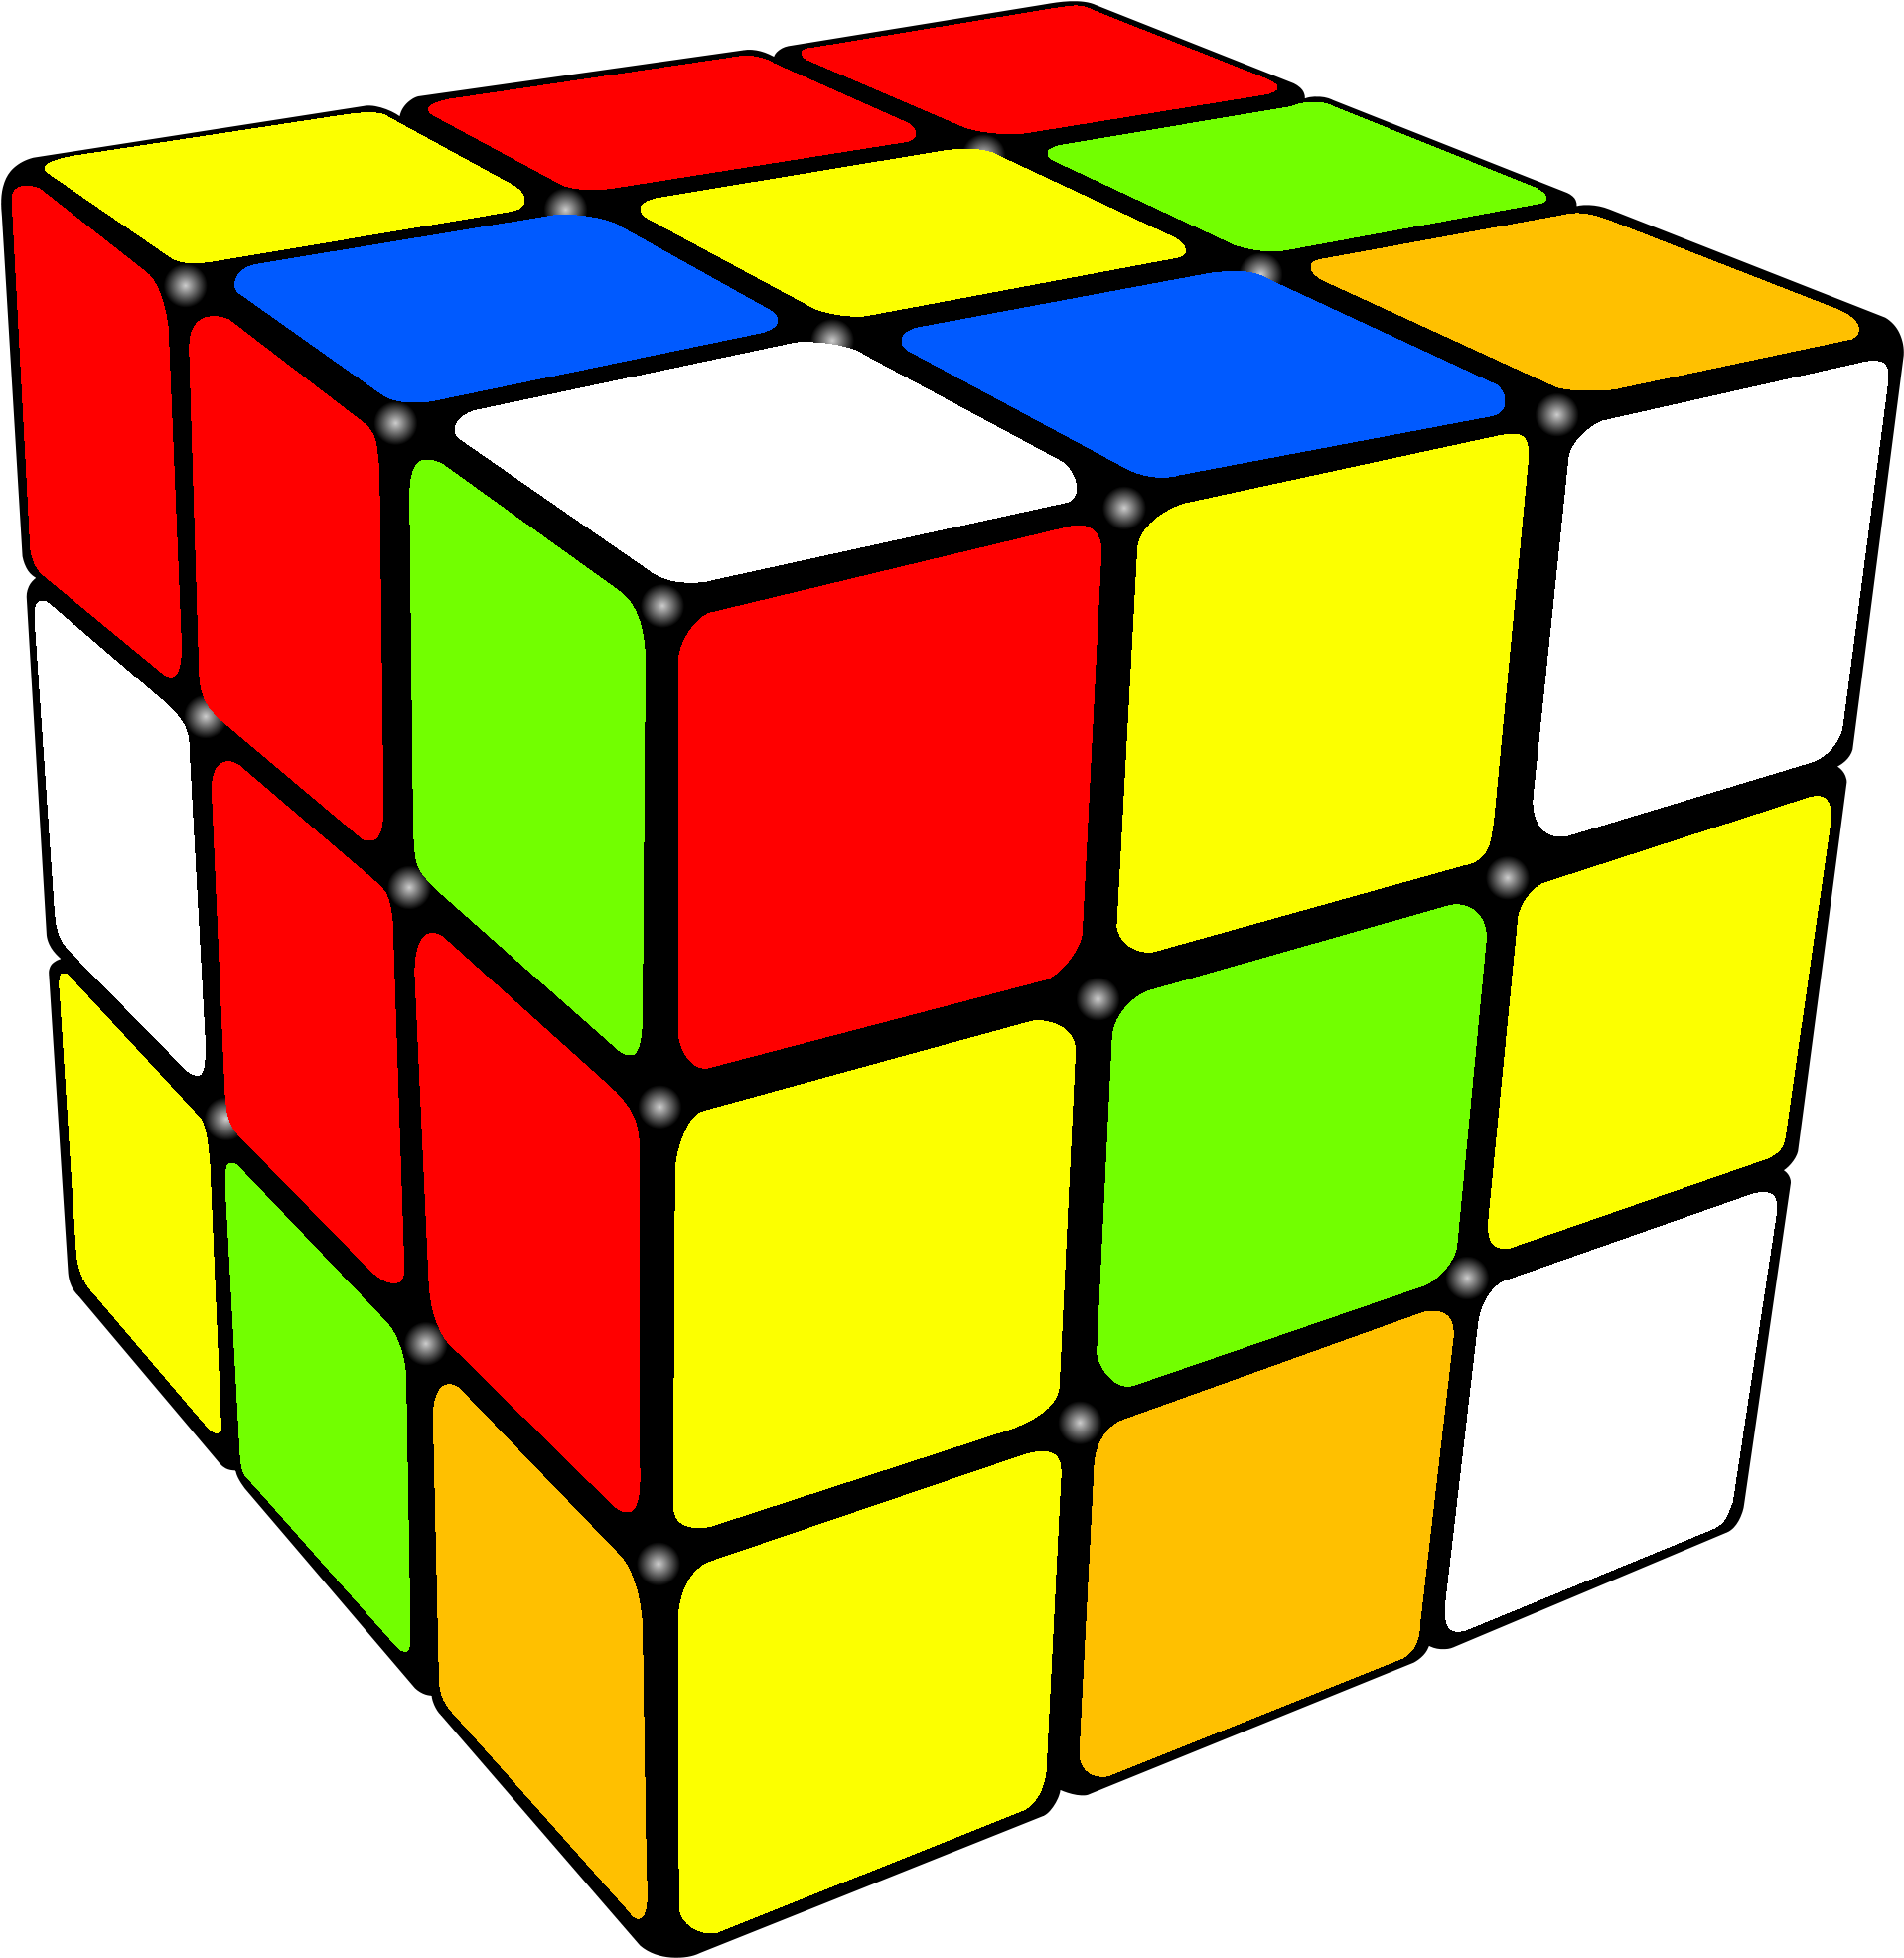 A Colorful Cube With Black Background